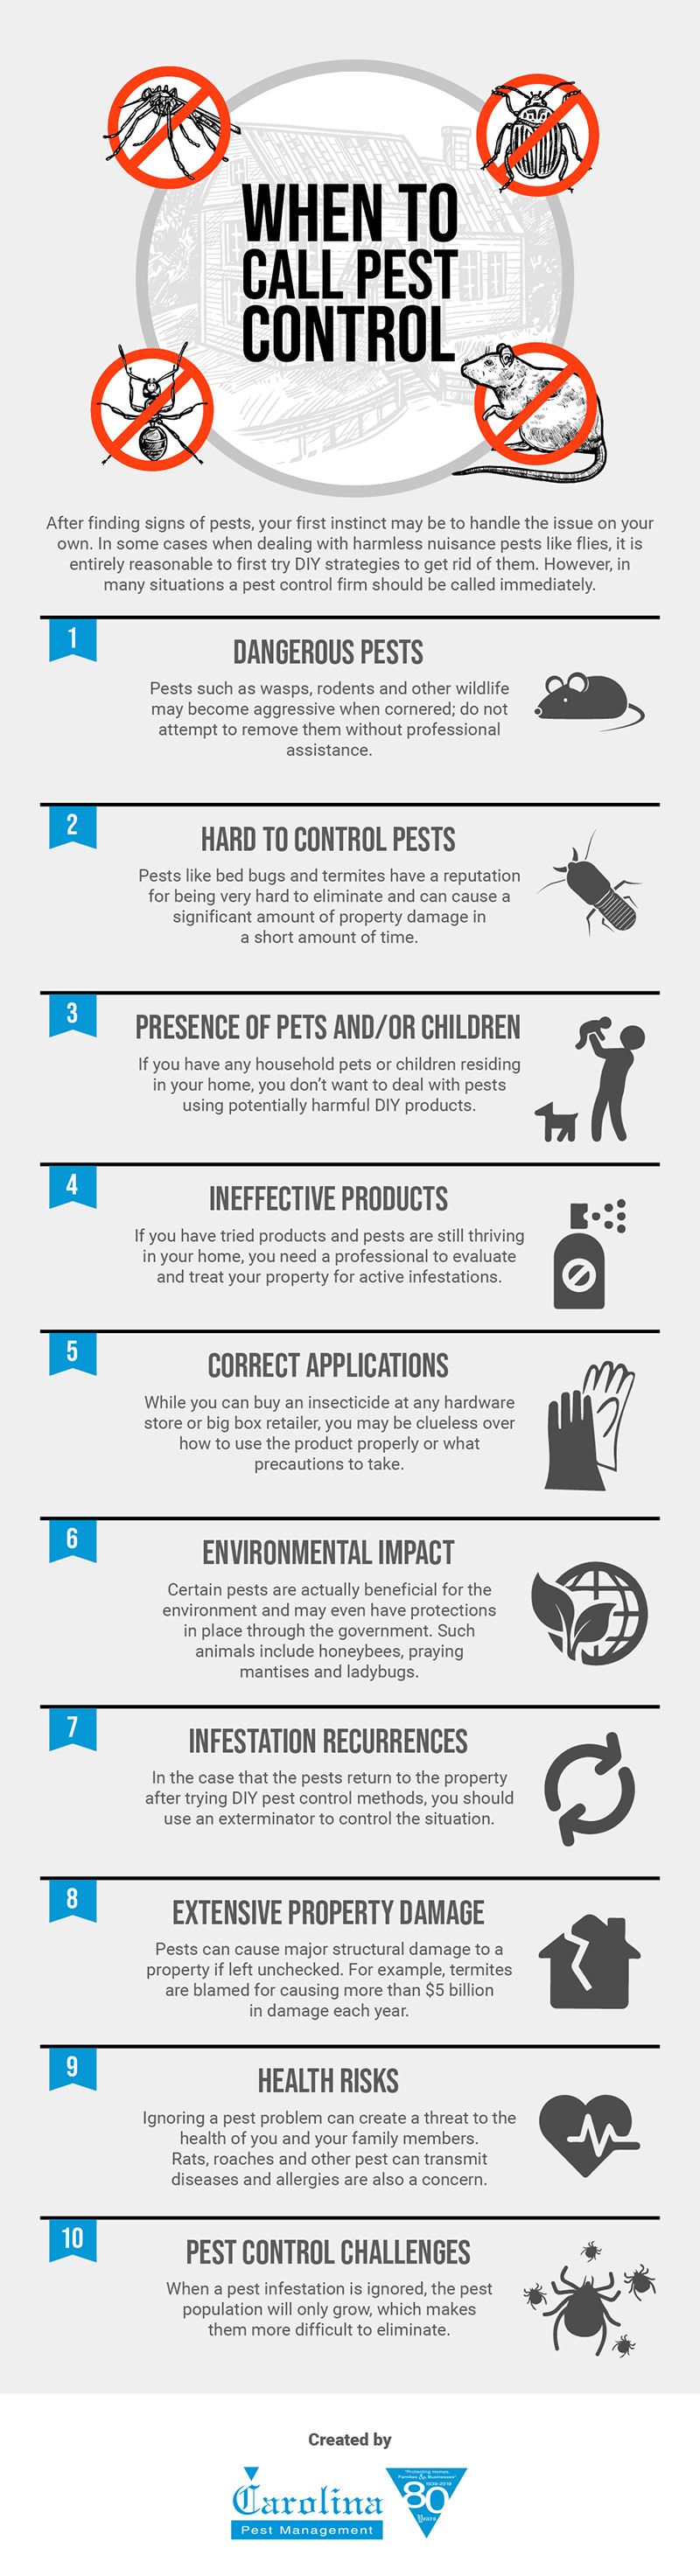 When is it Time to Call an Exterminator? Infographic | A List of 10 Occasions When Pest Control Firm Should Be Contacted Immediately